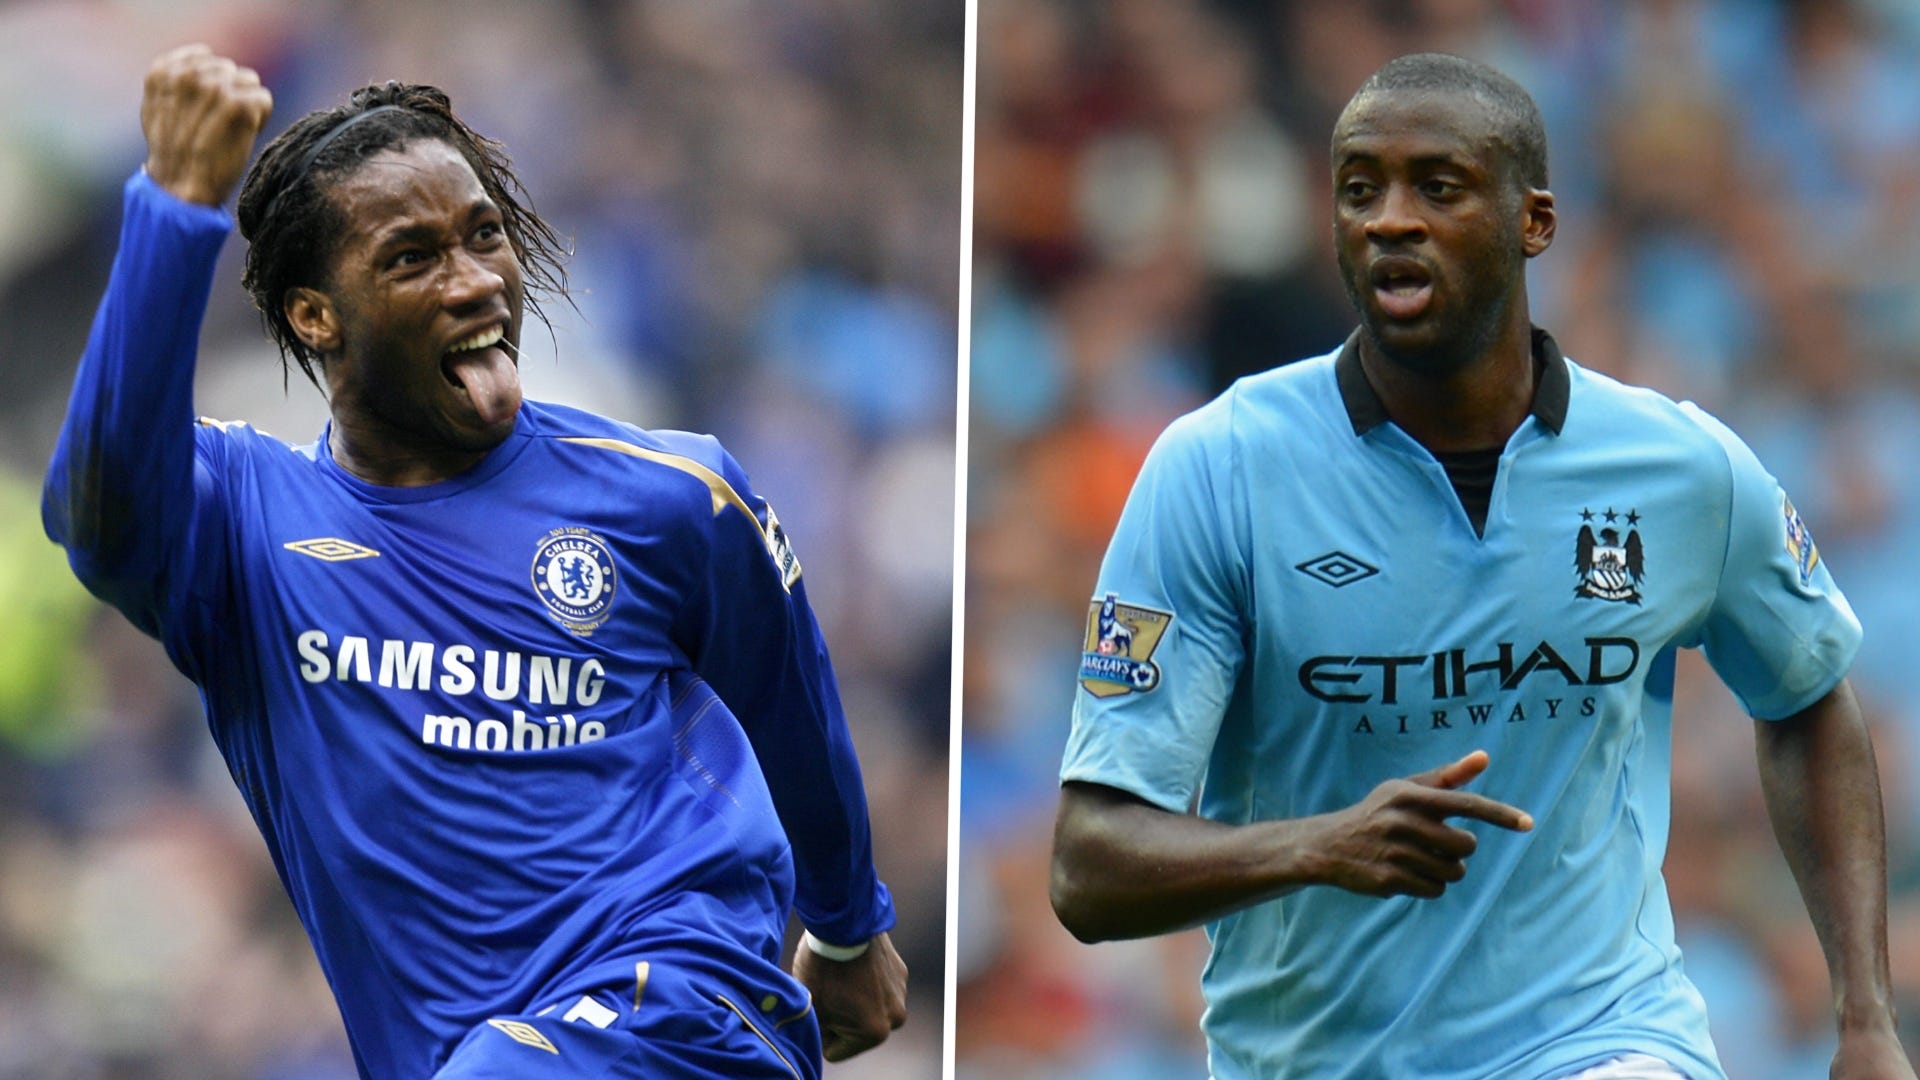 Chelsea v Manchester City Was Drogba or Yaya more influential in his clubs rise? Goal